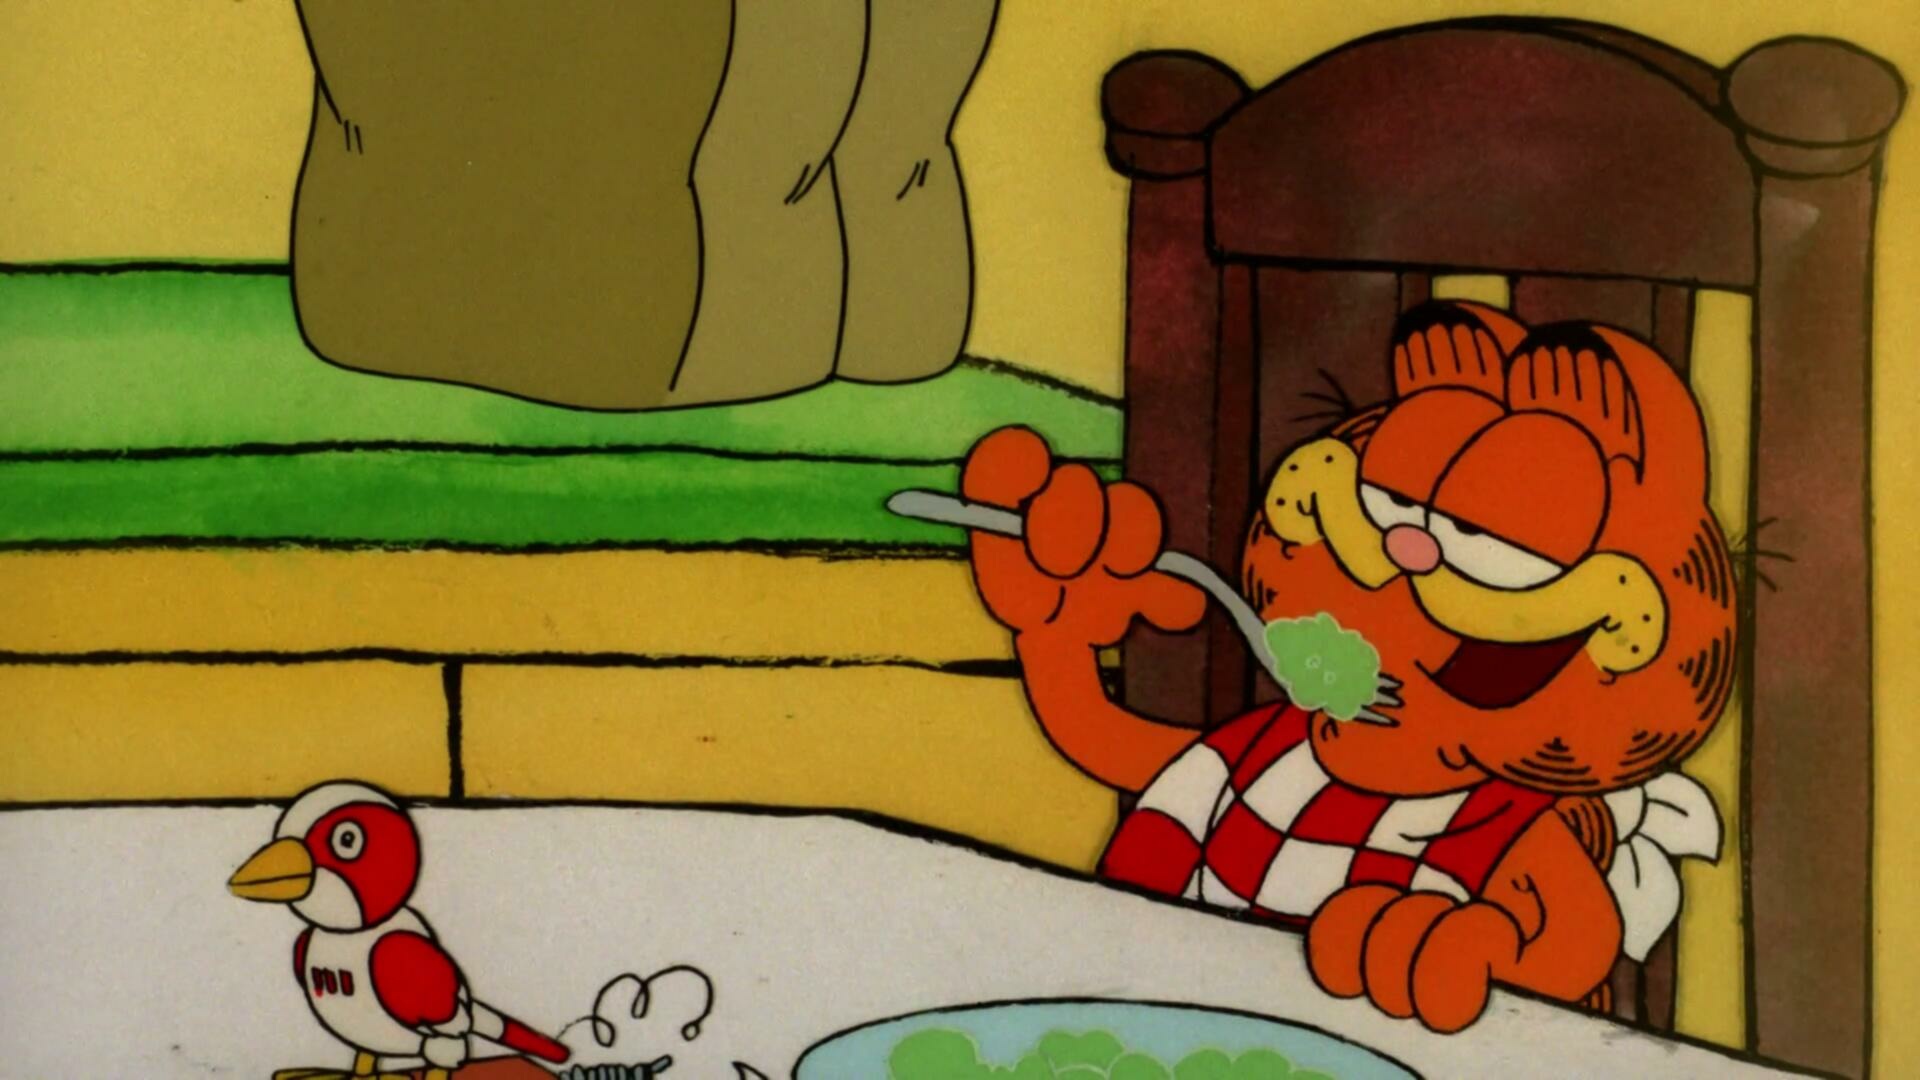 Garfield And Friends S02E01 Pest of a Guest The Impractical Joker Fat and Furry 1080p WEB DL AAC2 0